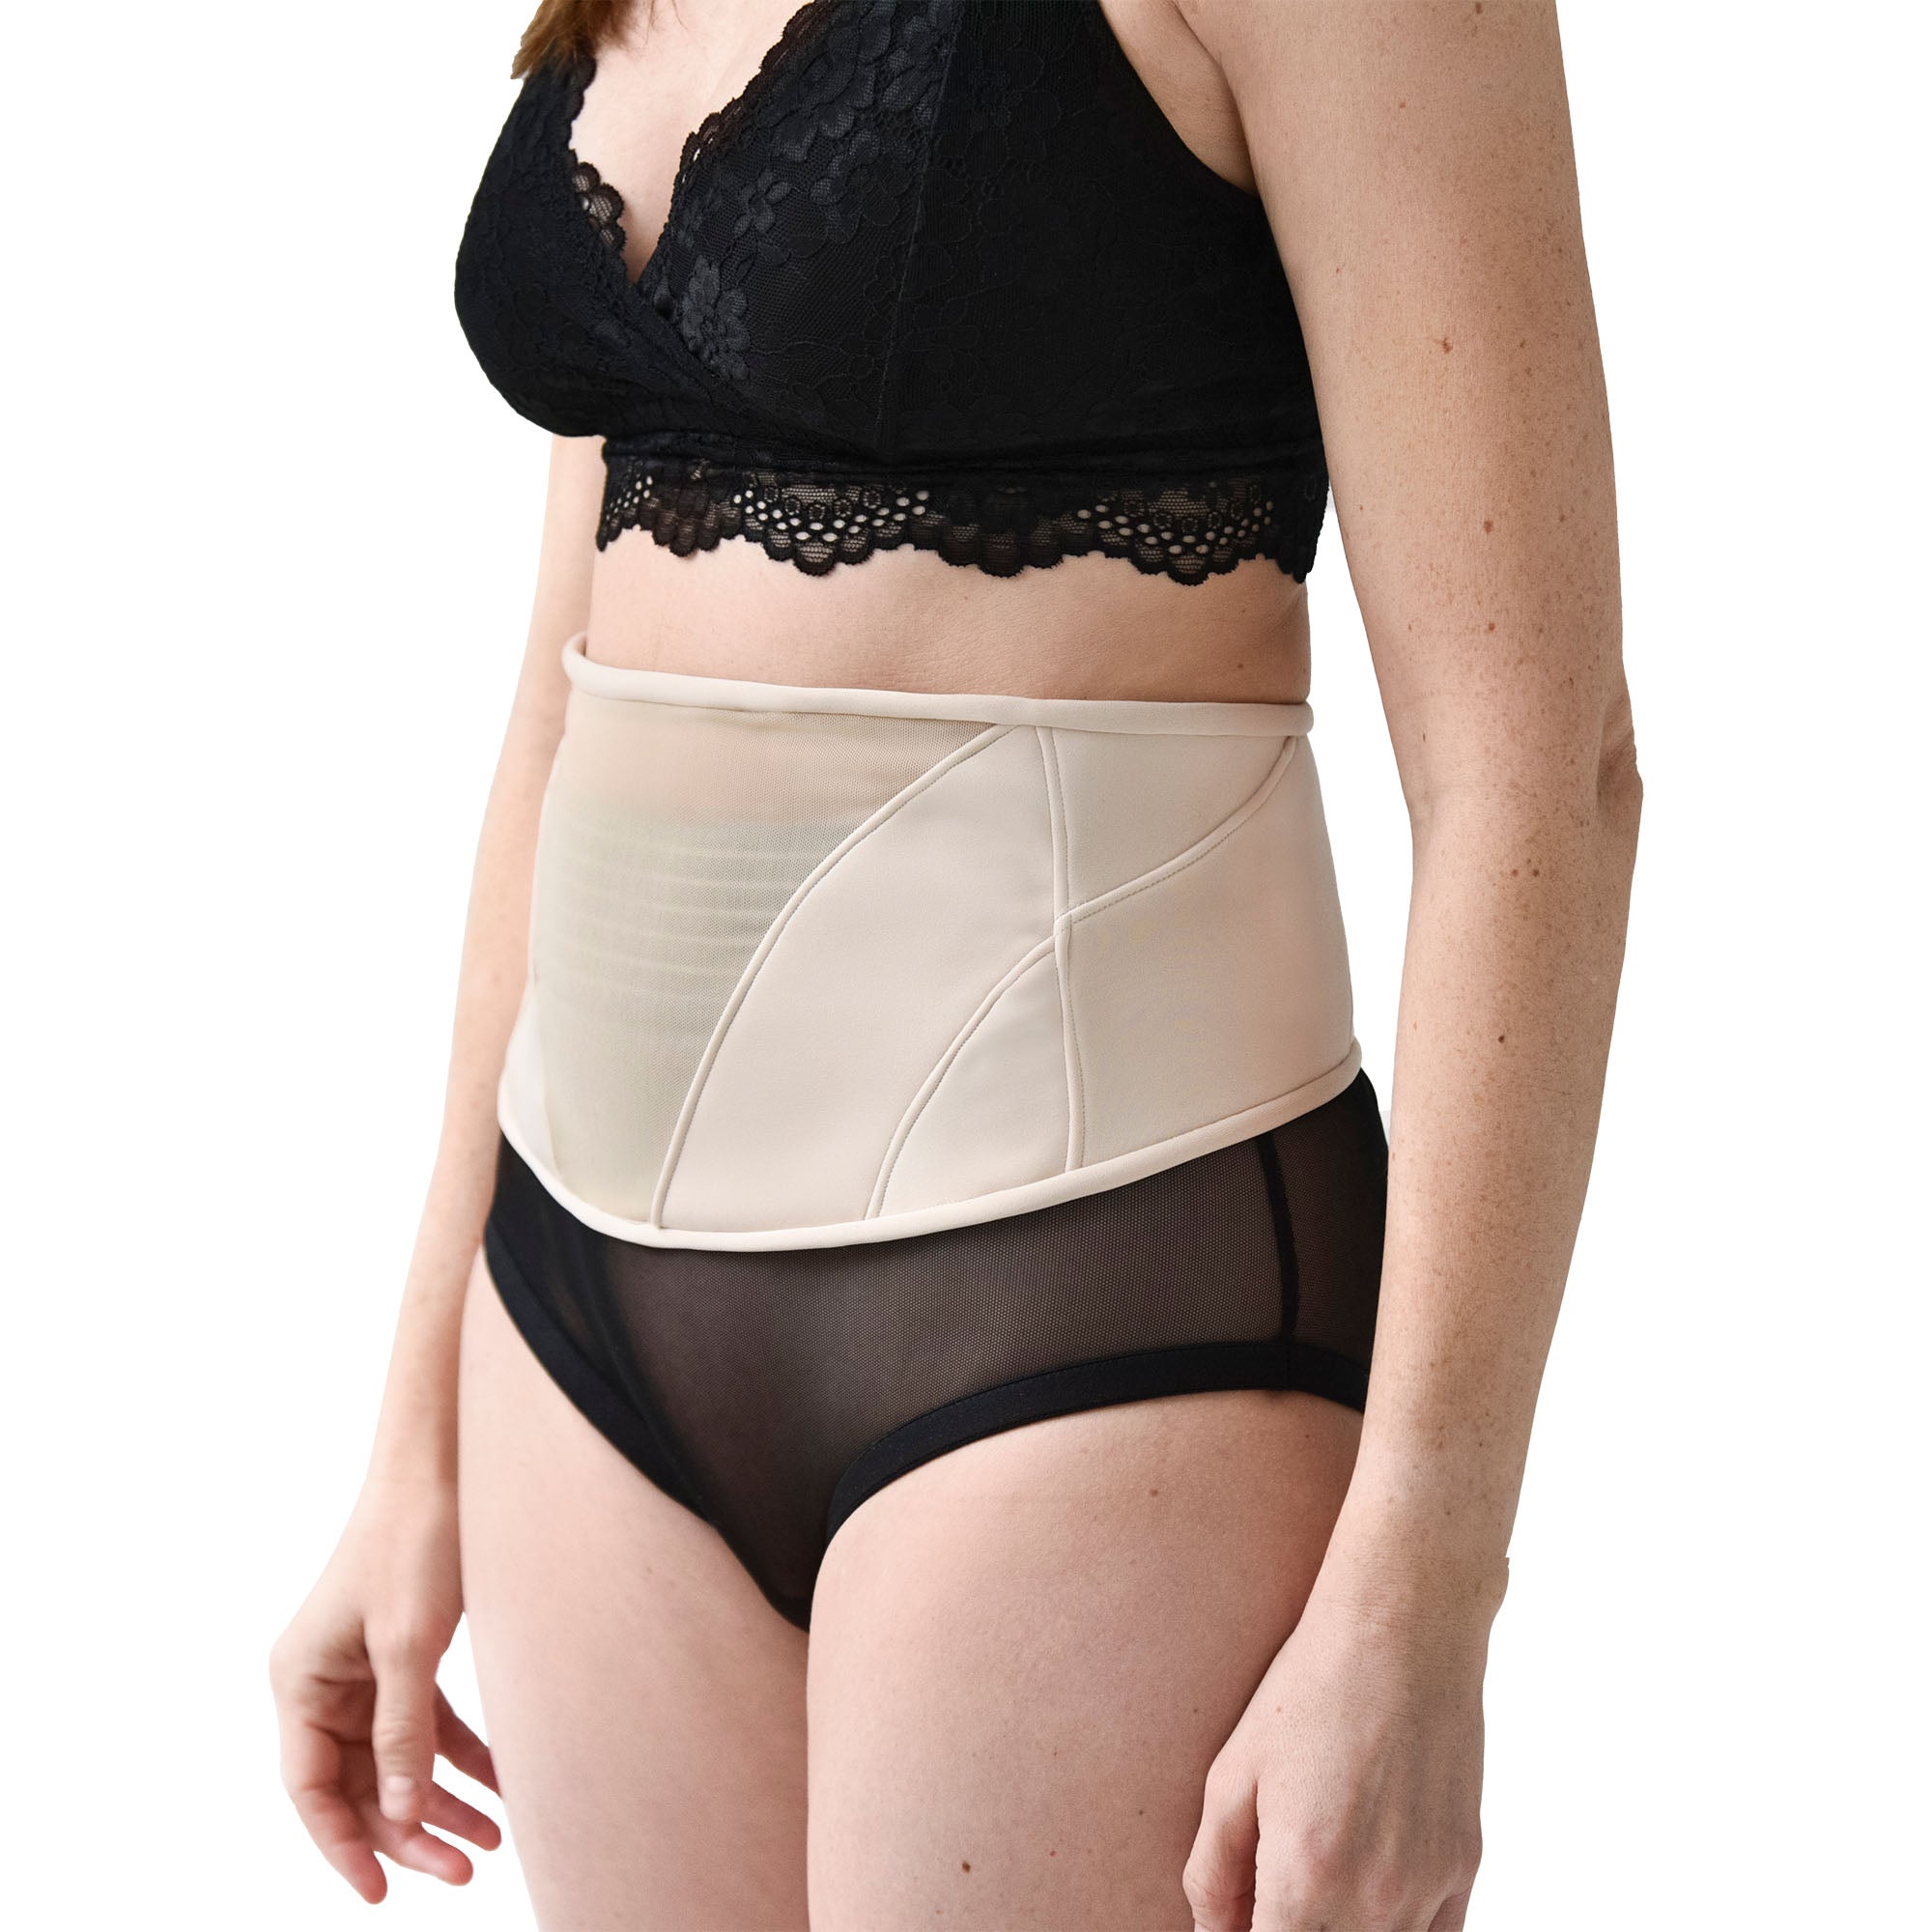 KeaBabies 2-in-1 Postpartum Belly Support Recovery Belts, Soft